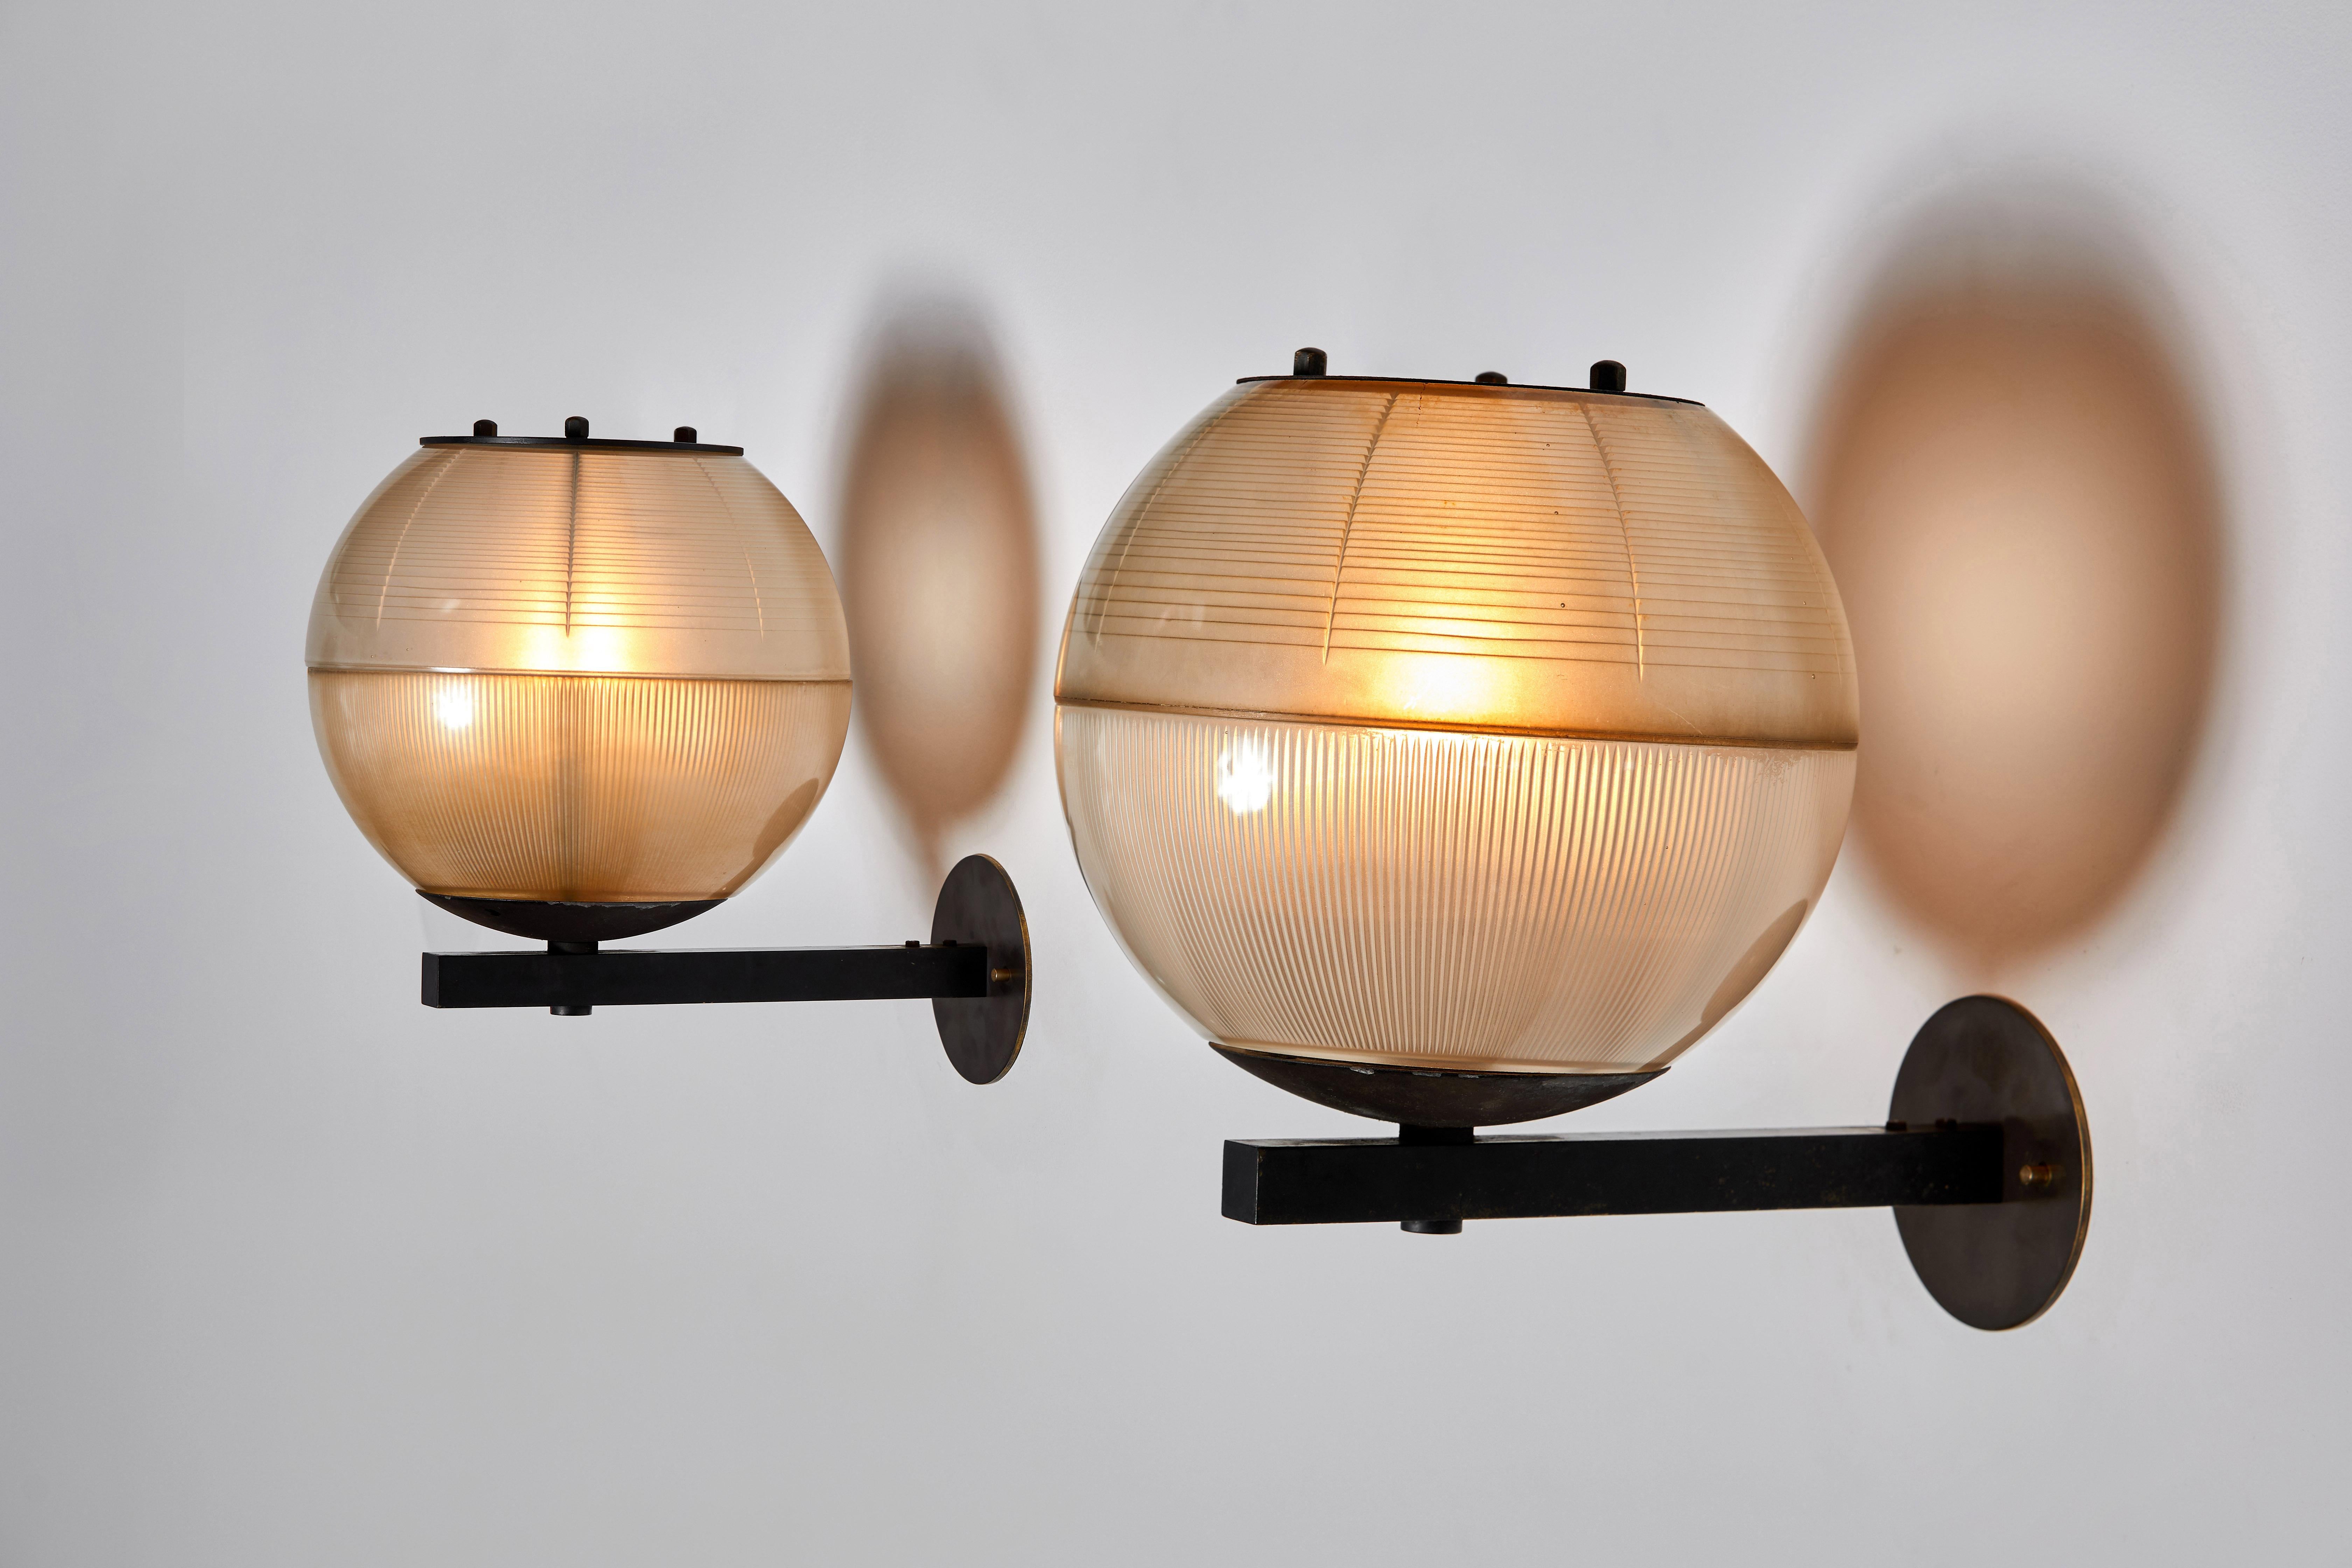 Pair of sconces manufactured in Italy, circa 1960s. Blackened metal with holophane glass diffuser. Rewired for U.S. junction boxes. Custom fabricated backplates. Each light takes one E27 100w maximum bulb. Bulbs provided as a onetime courtesy.